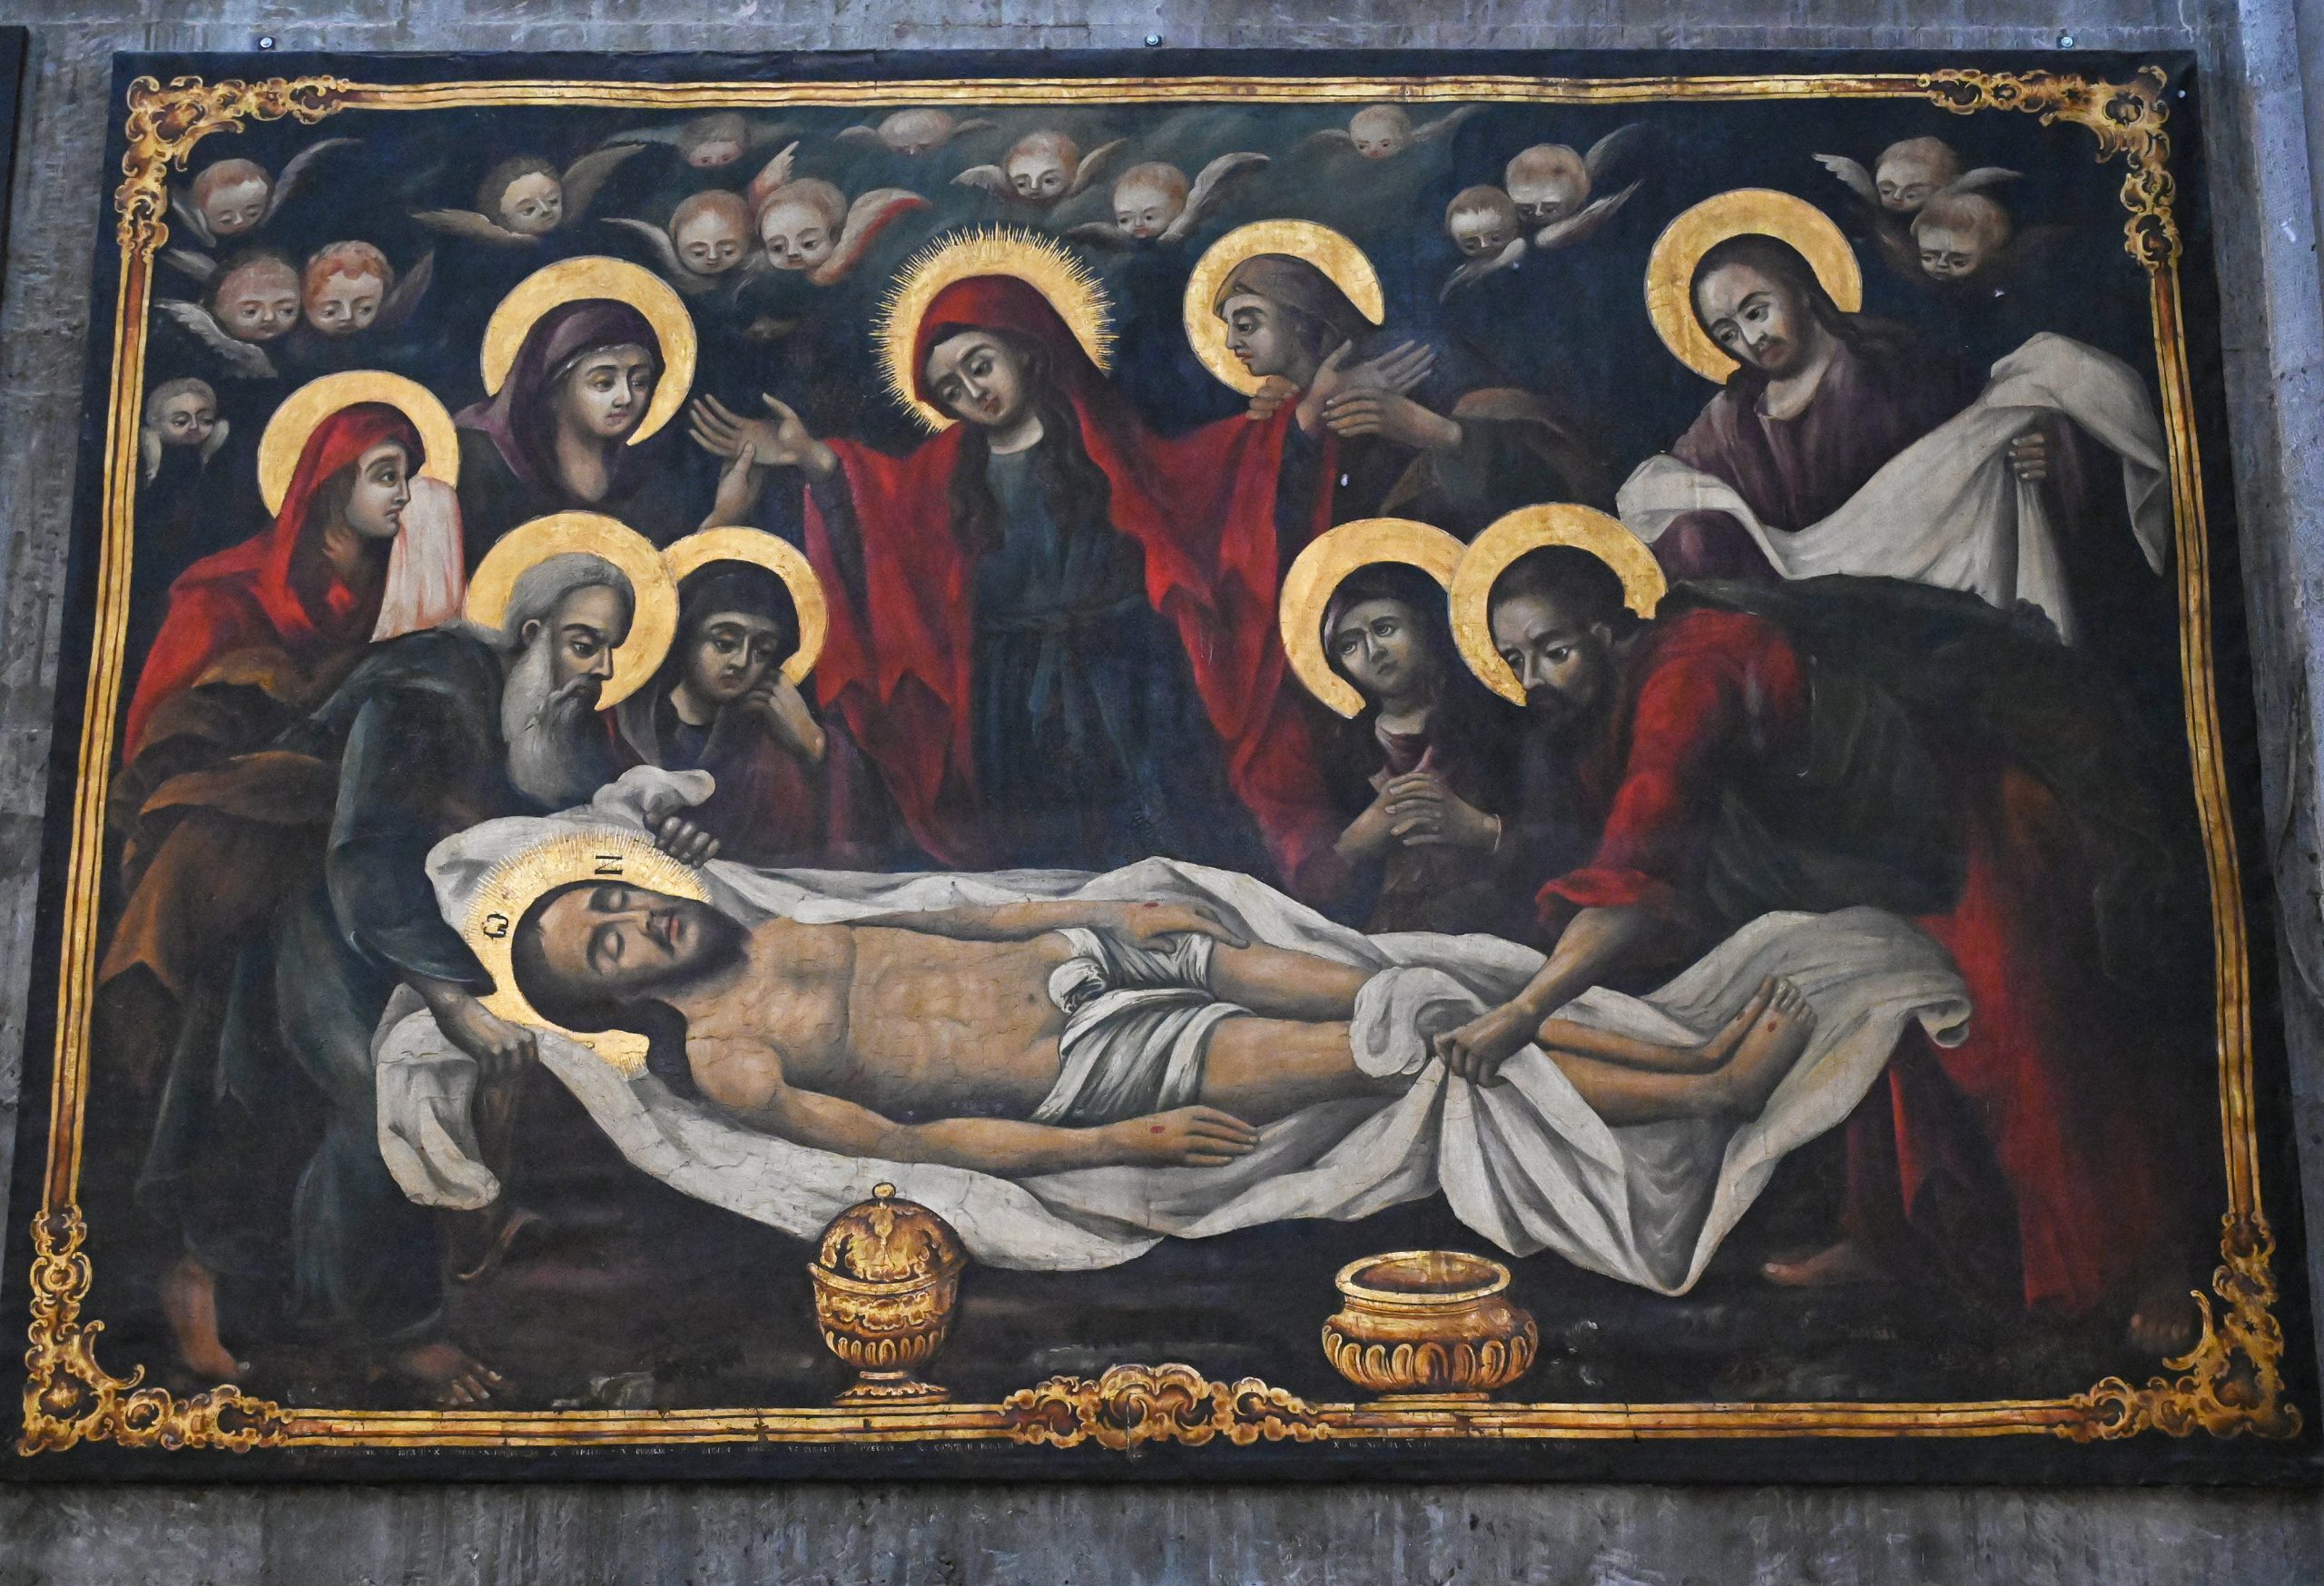 A painting of the burial of Christ that was restored by Greek art restorer Zarifis Zarifopoulos is seen in the Church of the Holy Sepulcher in the Old City of Jerusalem, March 10, 2023. (OSV News photo/Debbie Hill)